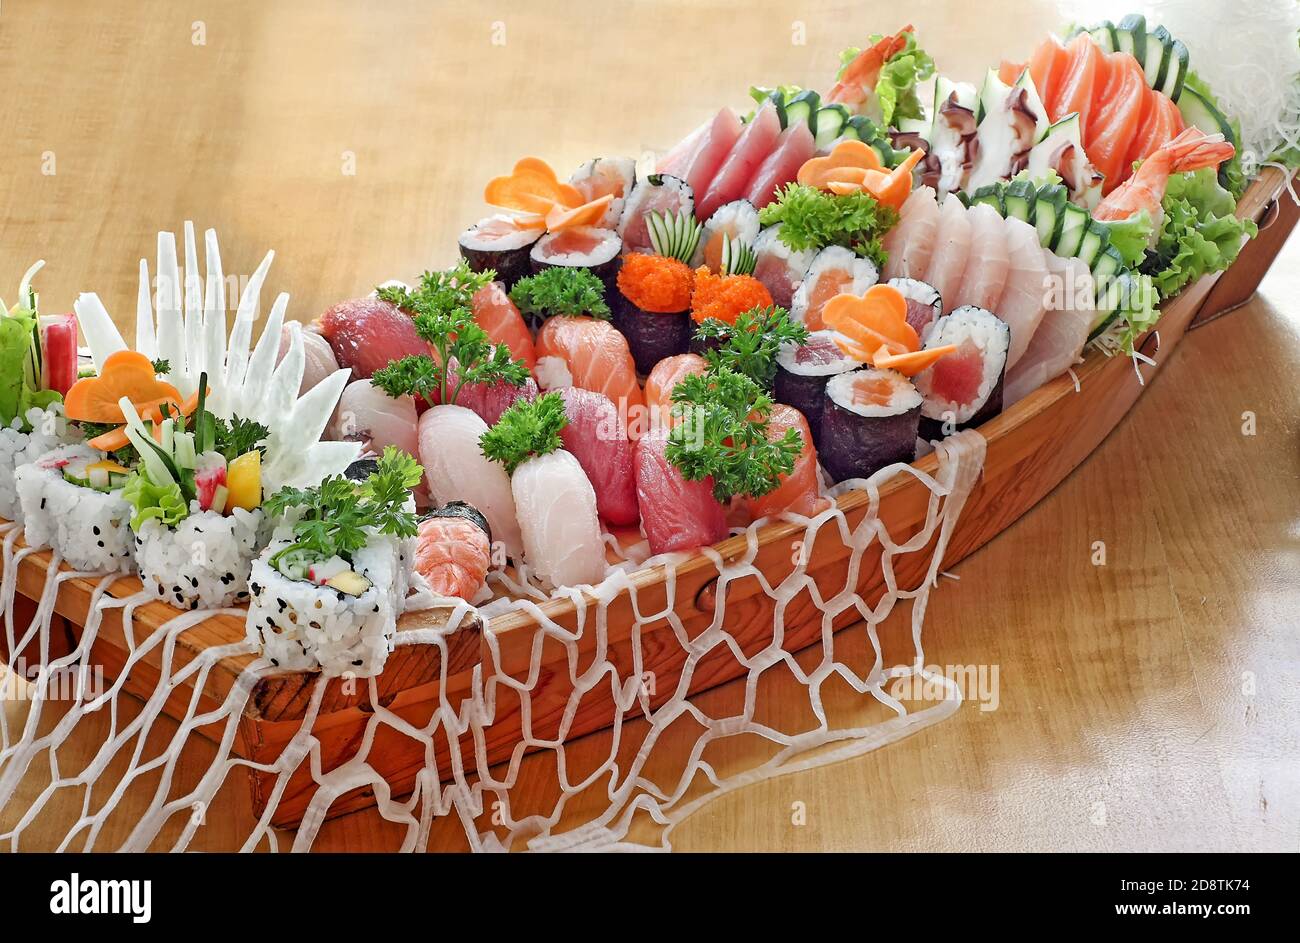 various dishes of Japanese cuisine Stock Photo